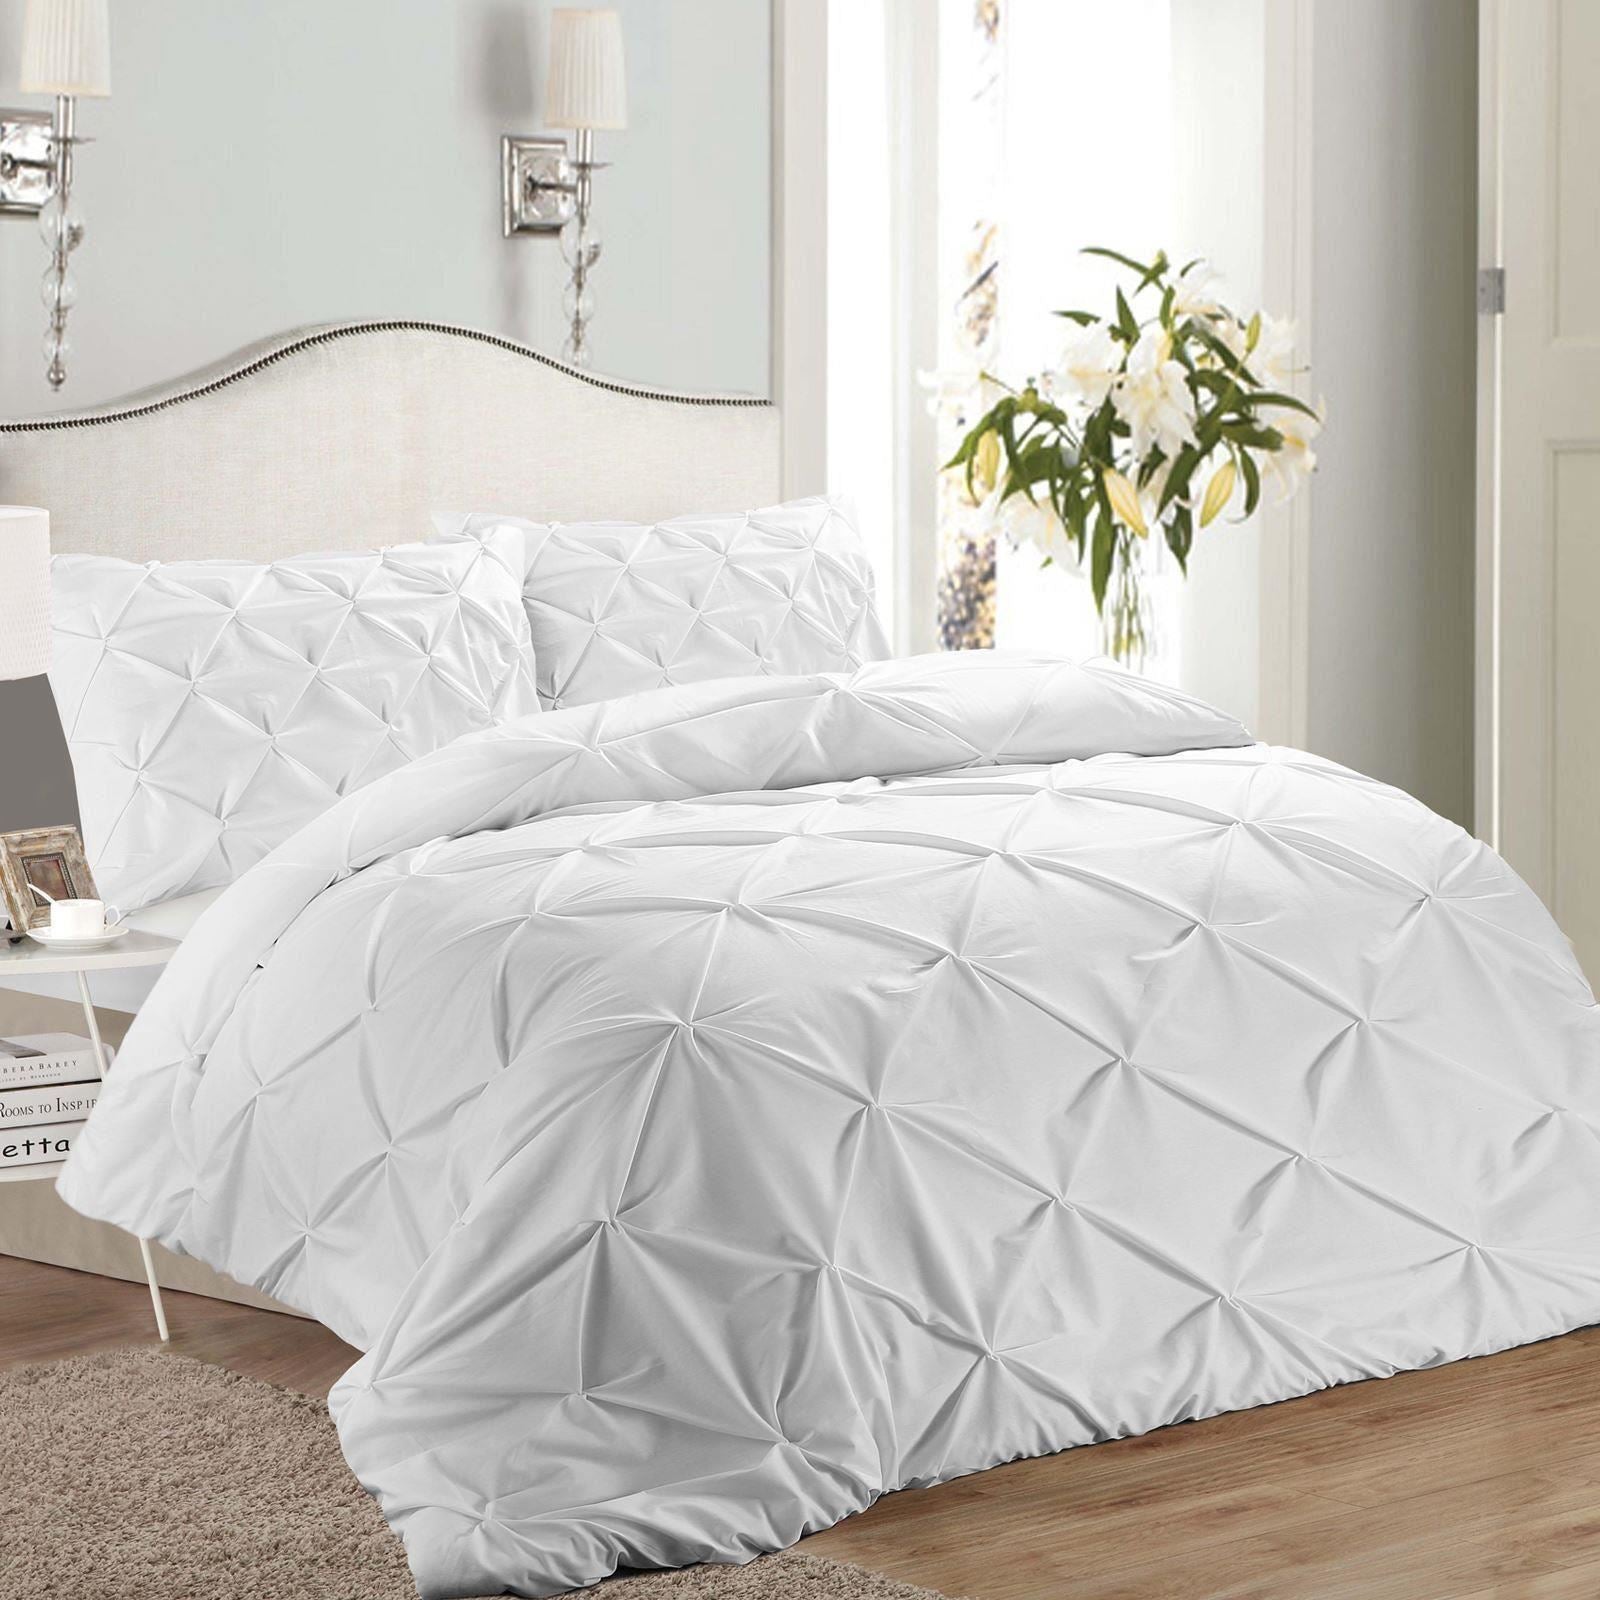 Luxury Pinch Pleat Diamond Quilt Cover Set Direct On Sale